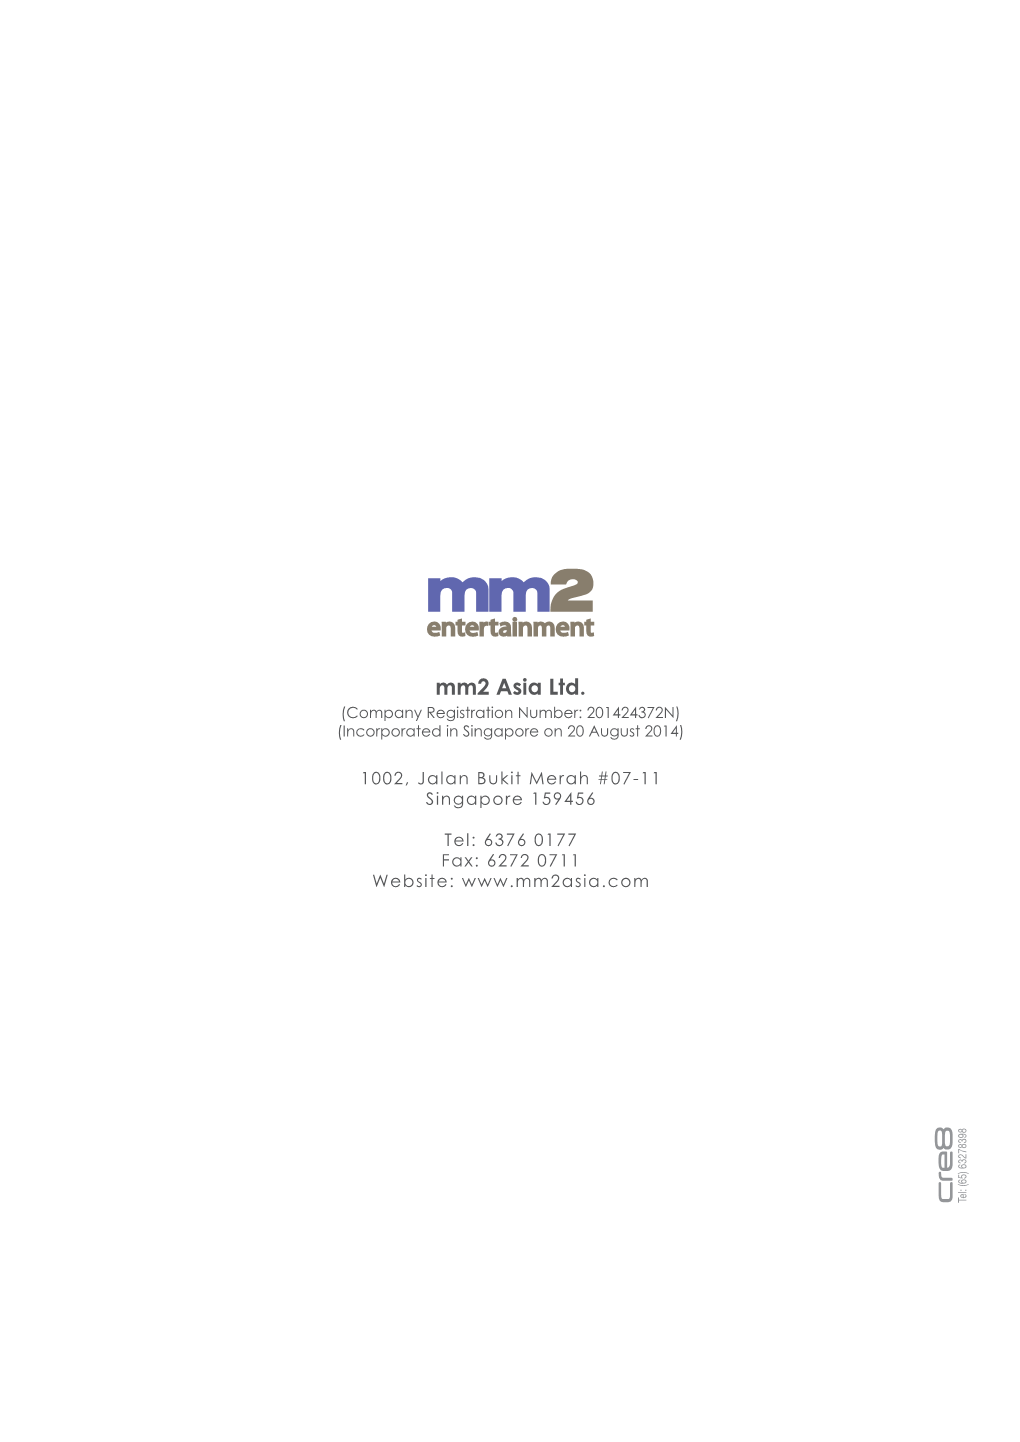 Mm2 Asia Ltd. (Company Registration Number: 201424372N) (Incorporated in Singapore on 20 August 2014)